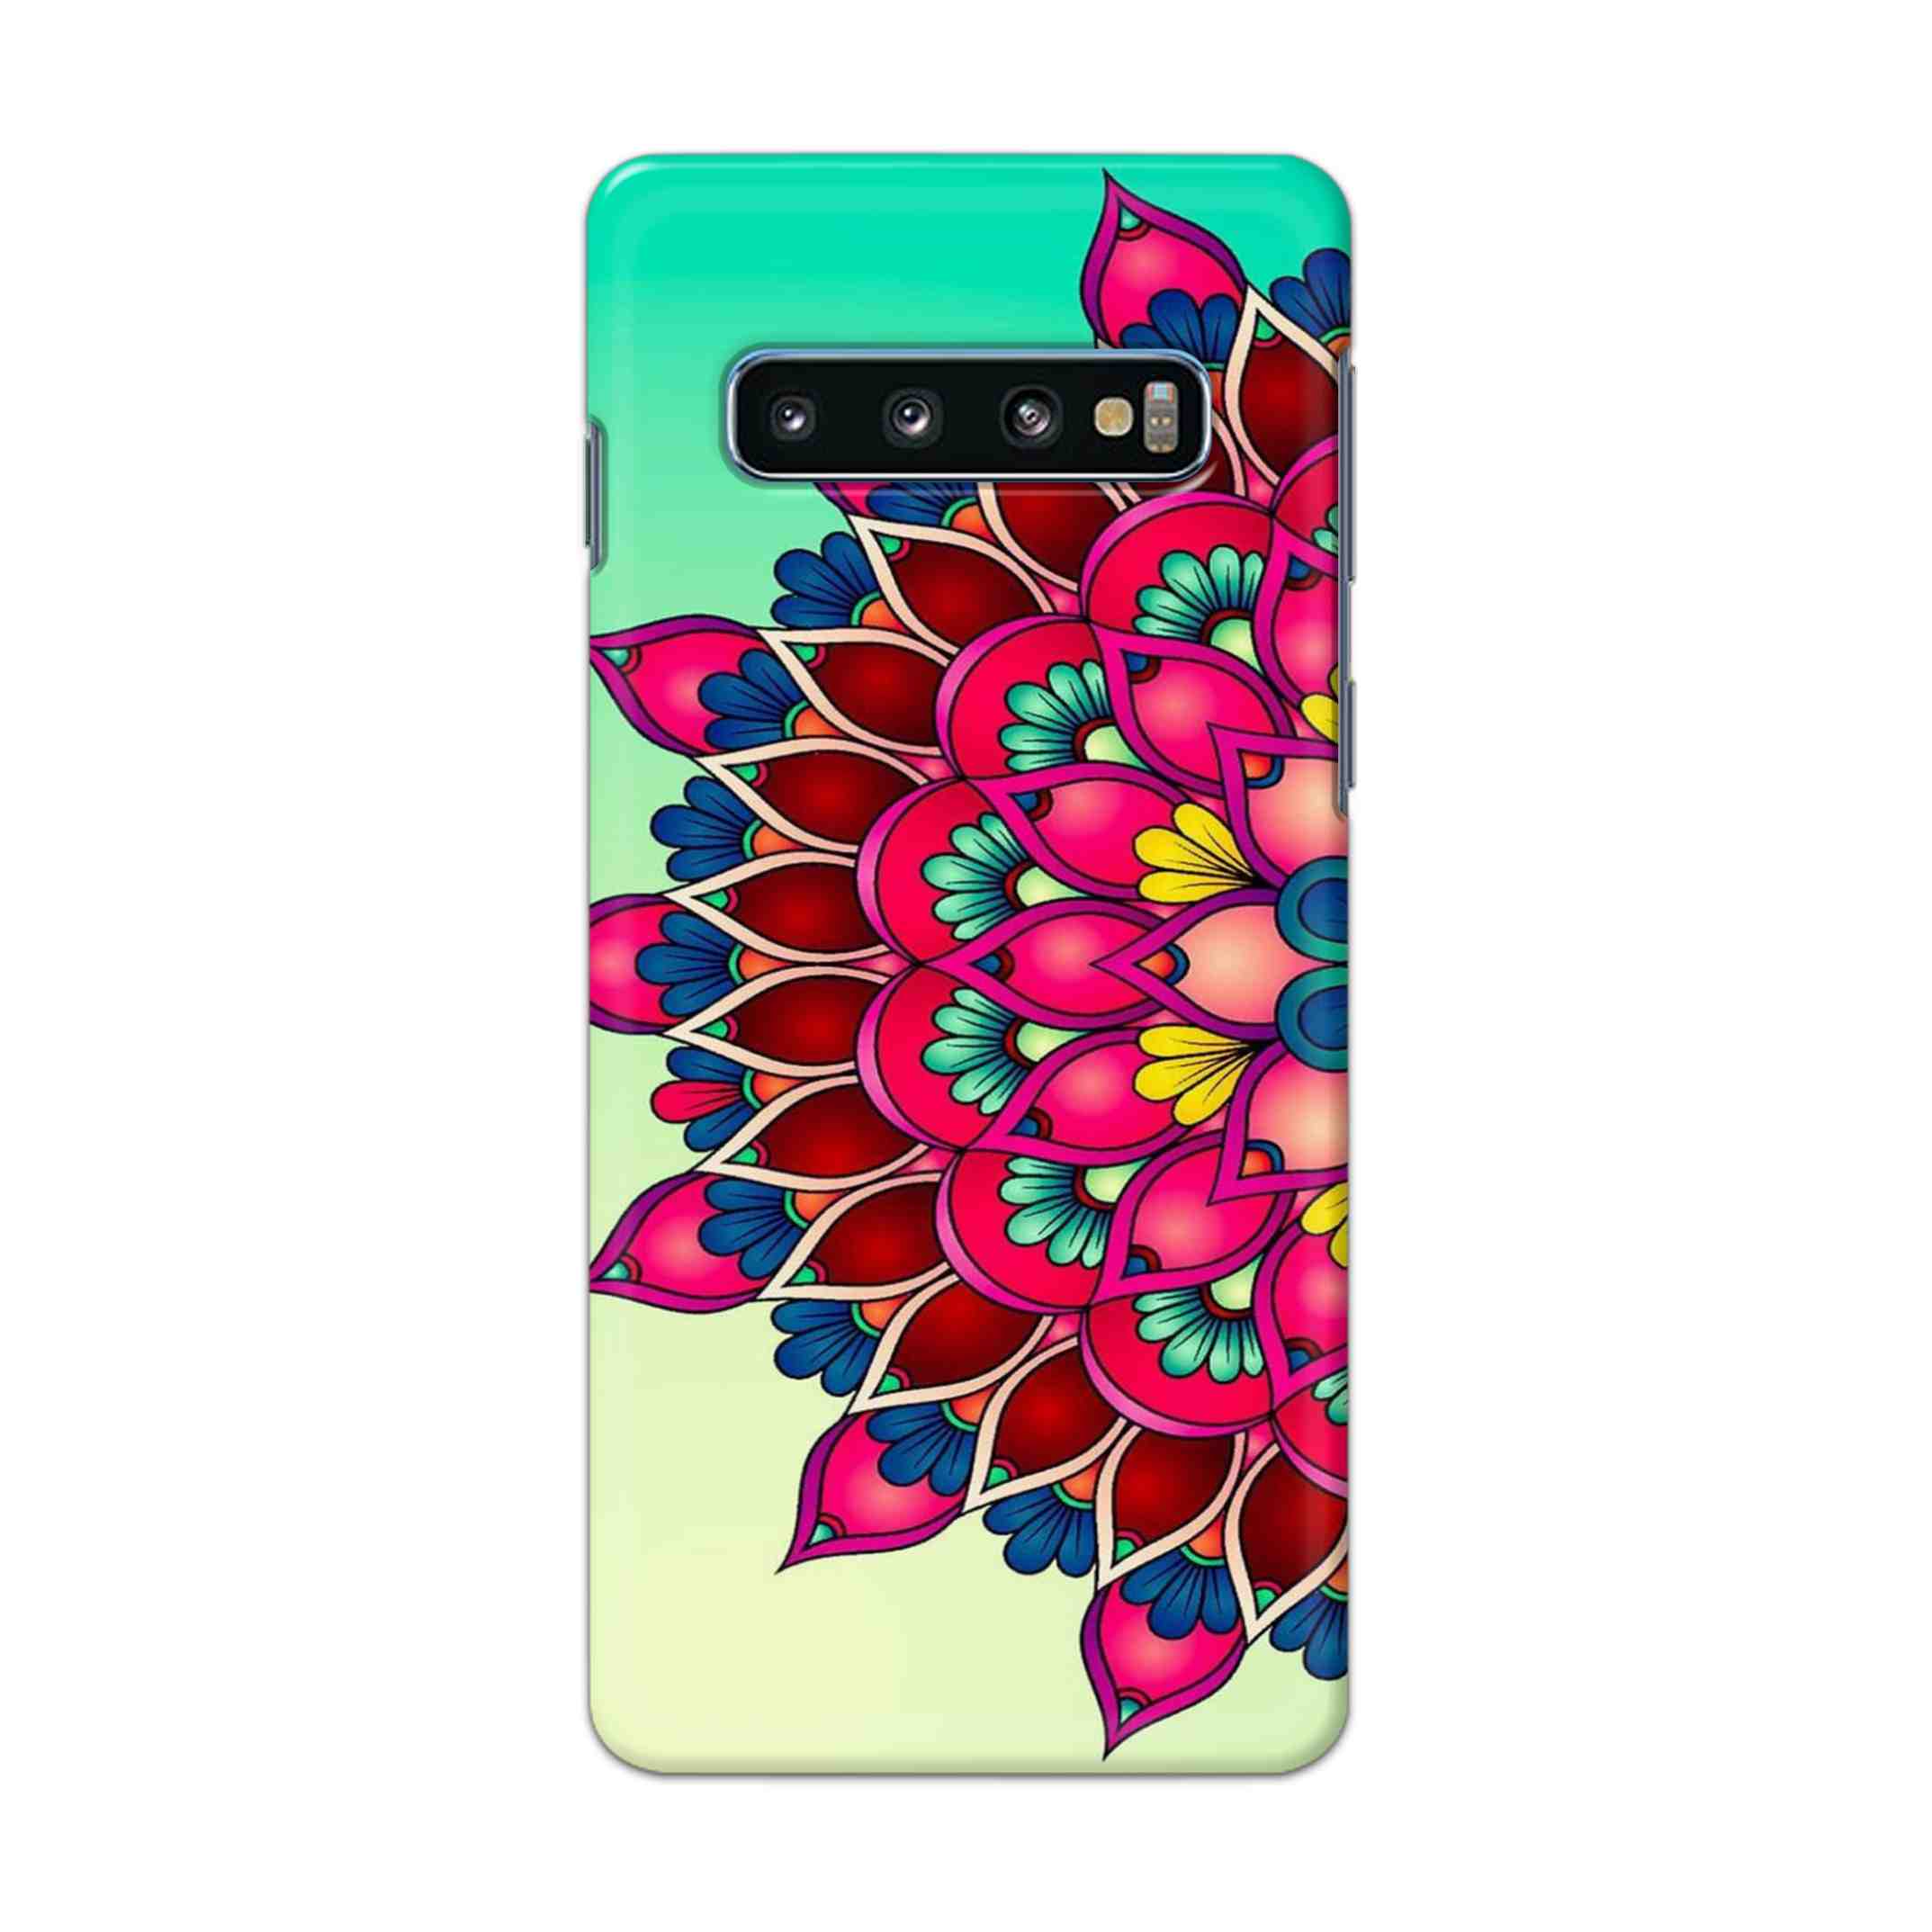 Buy Lotus Mandala Hard Back Mobile Phone Case Cover For Samsung Galaxy S10 Plus Online